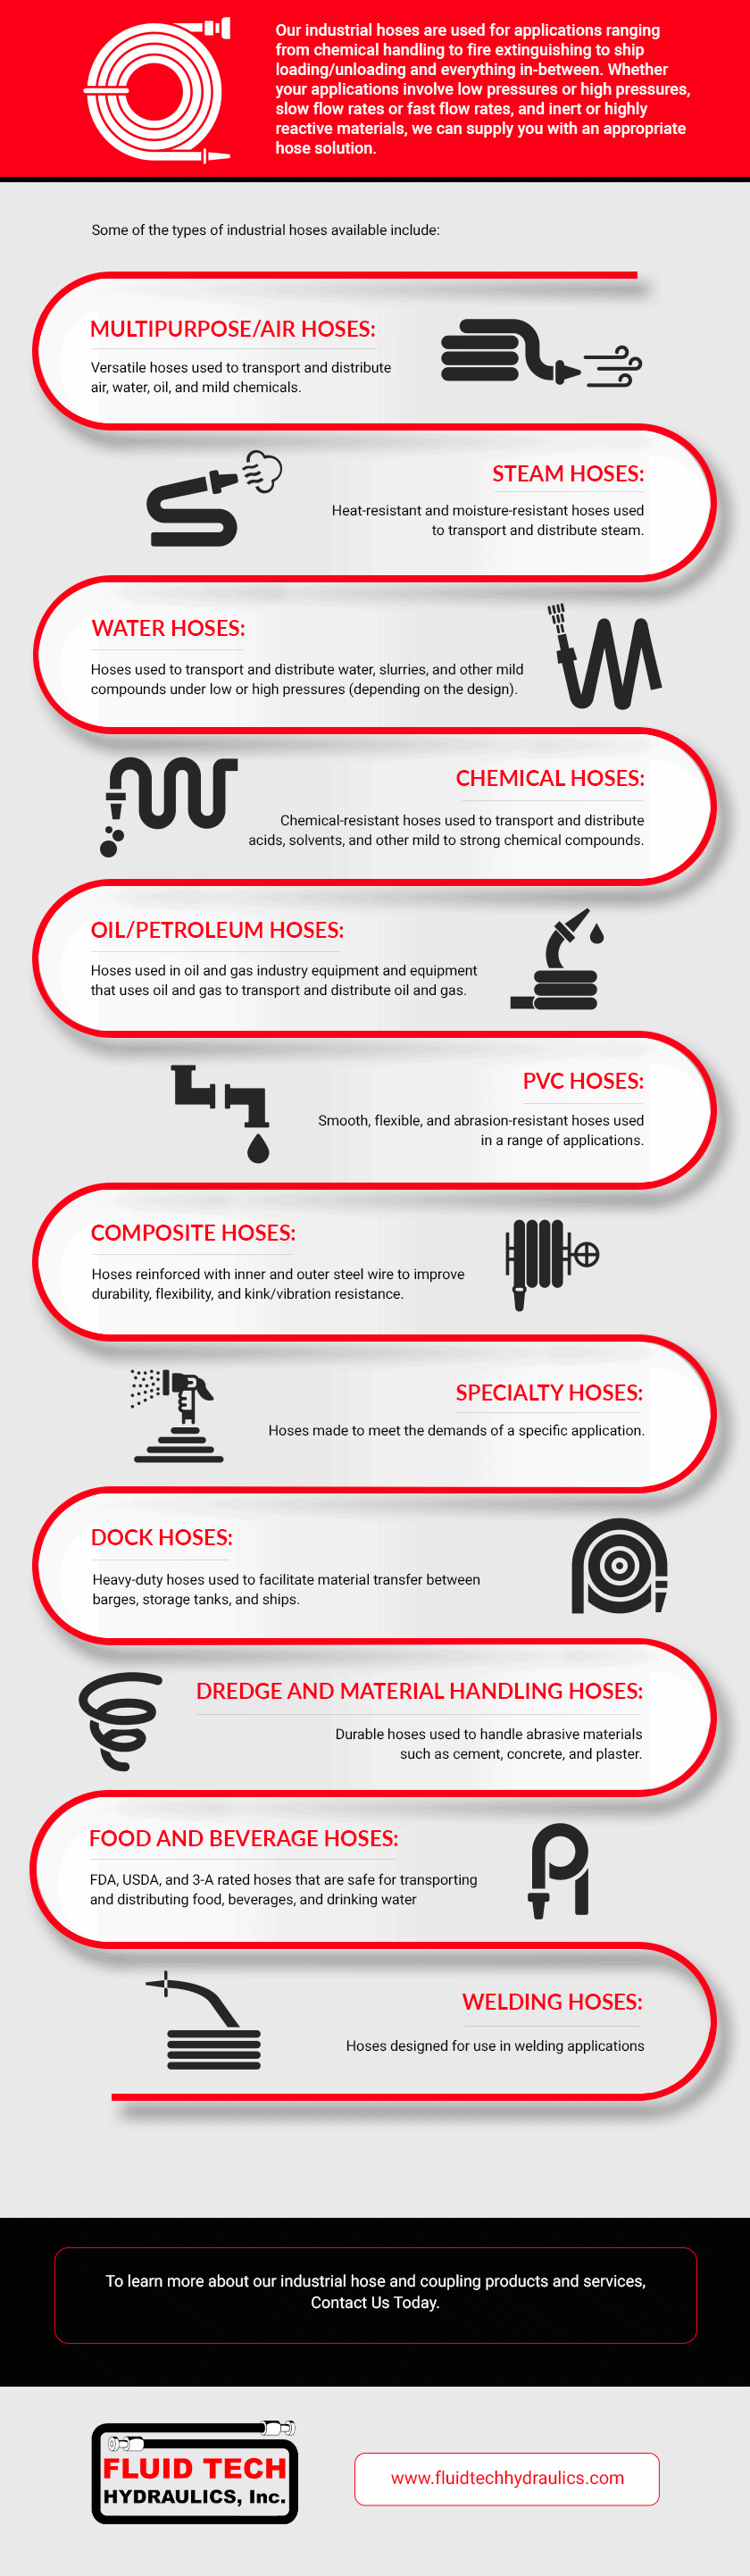 An infographic depicting different types of industrial hoses.